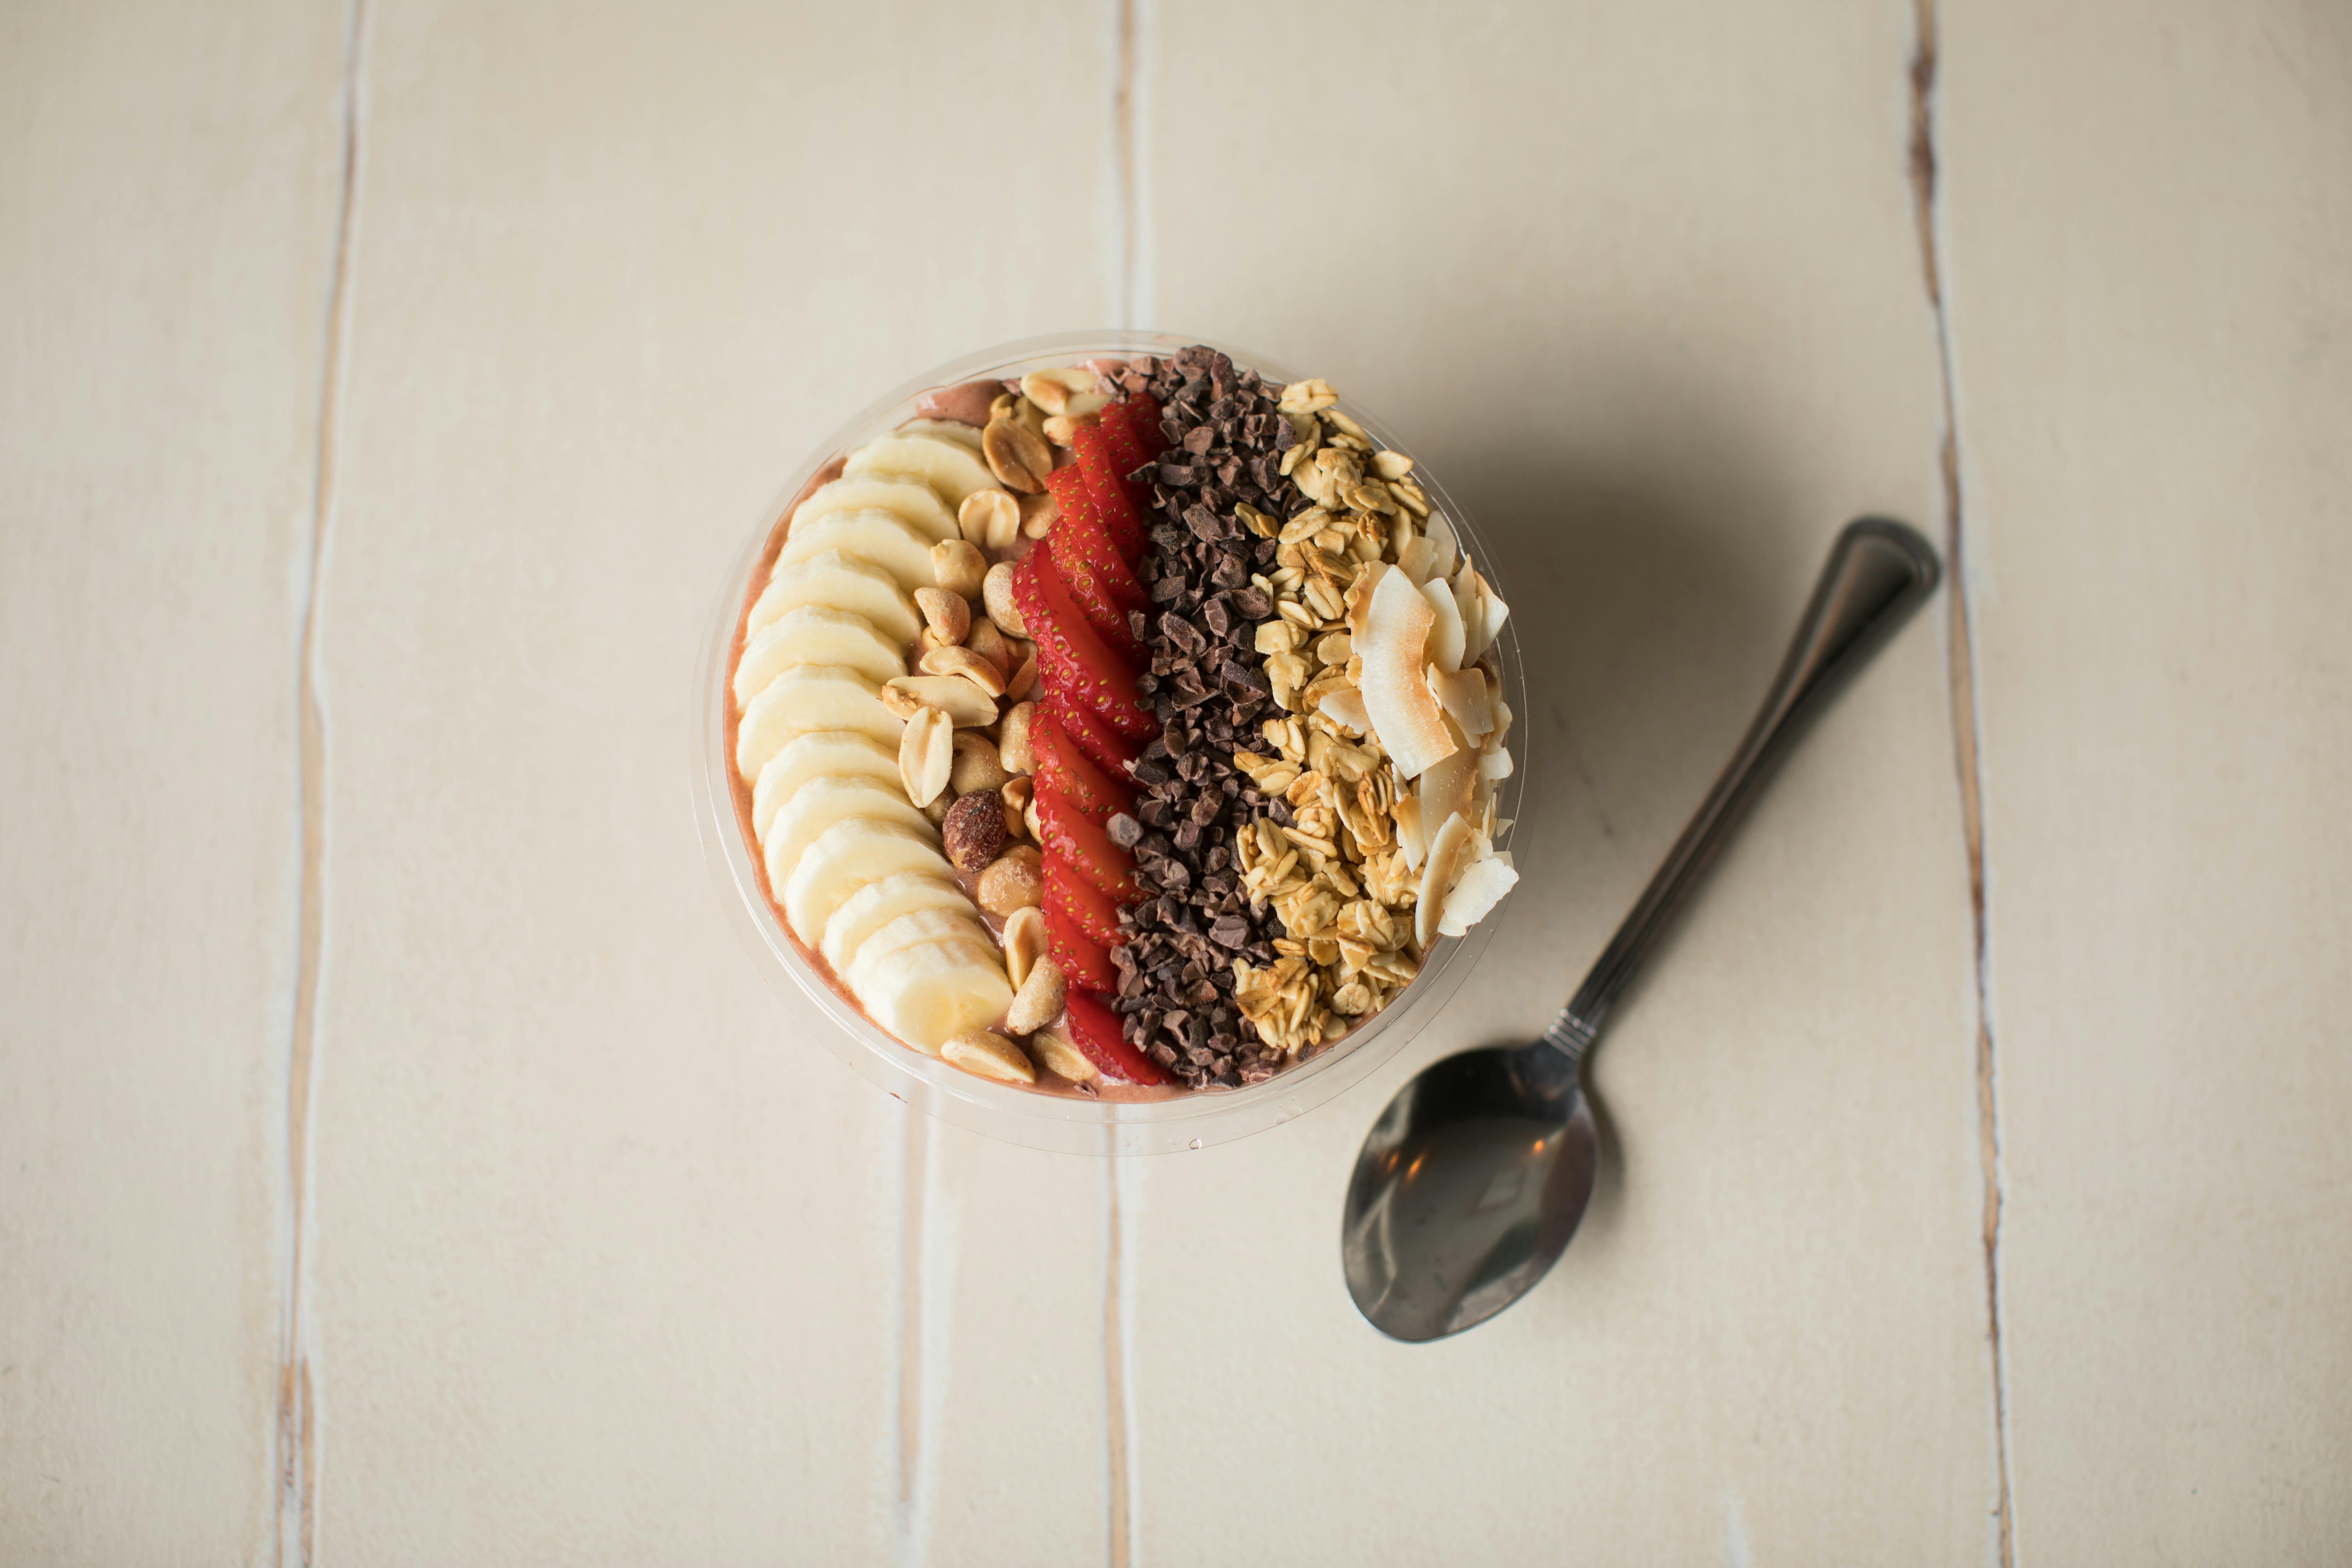 Banana Split Smoothie Bowl from Dirt Juicery - Bay Park Square in Green Bay, WI